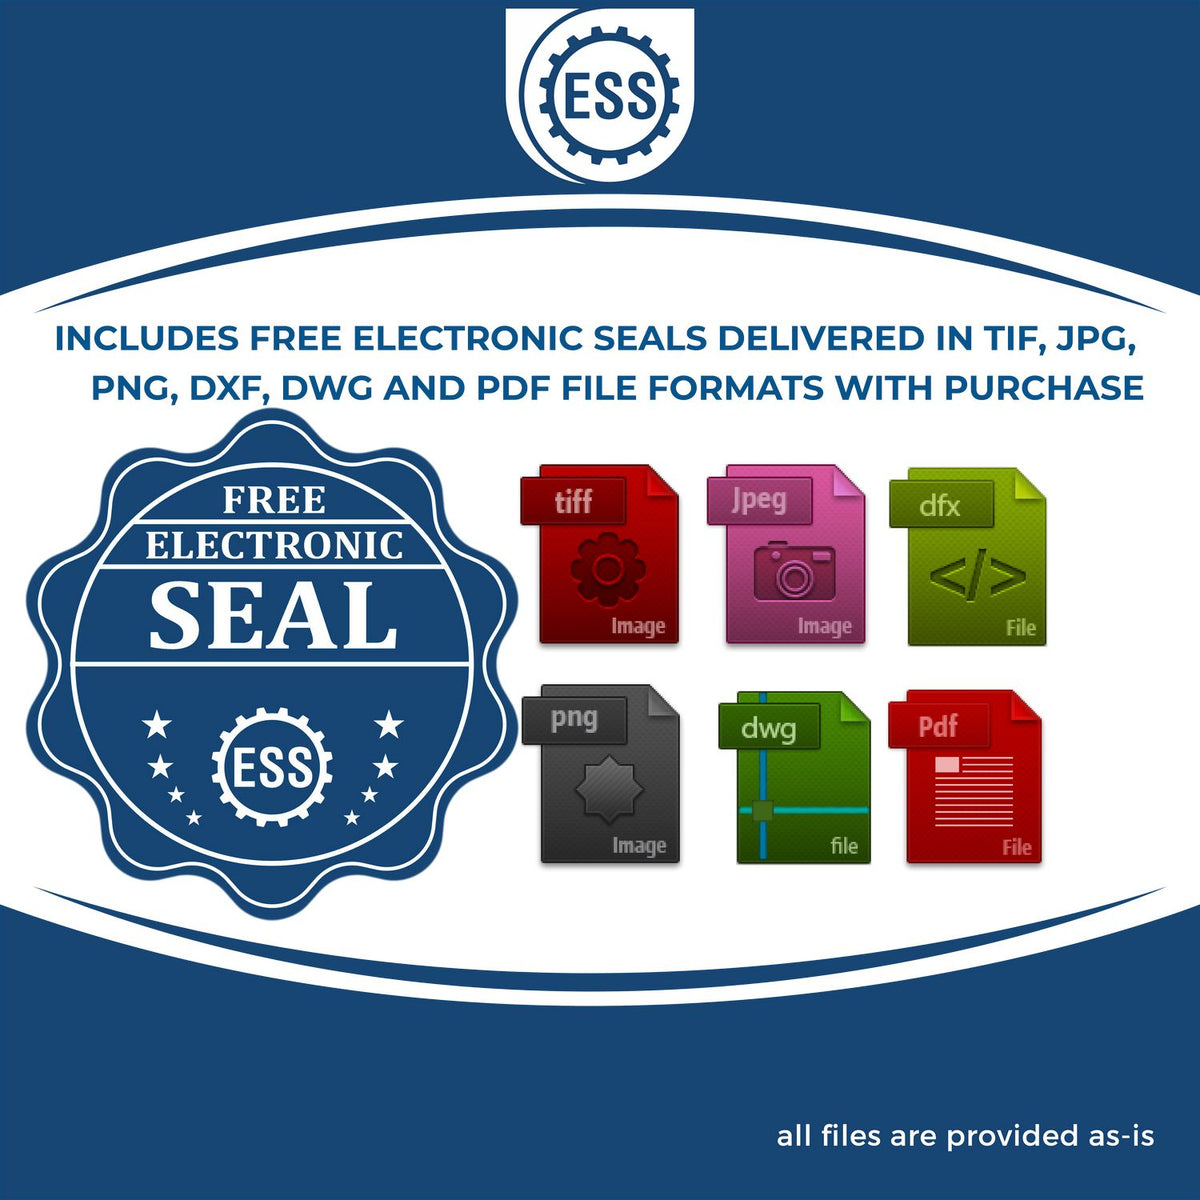 An infographic for the free electronic seal for the Extended Long Reach Nebraska Surveyor Embosser illustrating the different file type icons such as DXF, DWG, TIF, JPG and PNG.